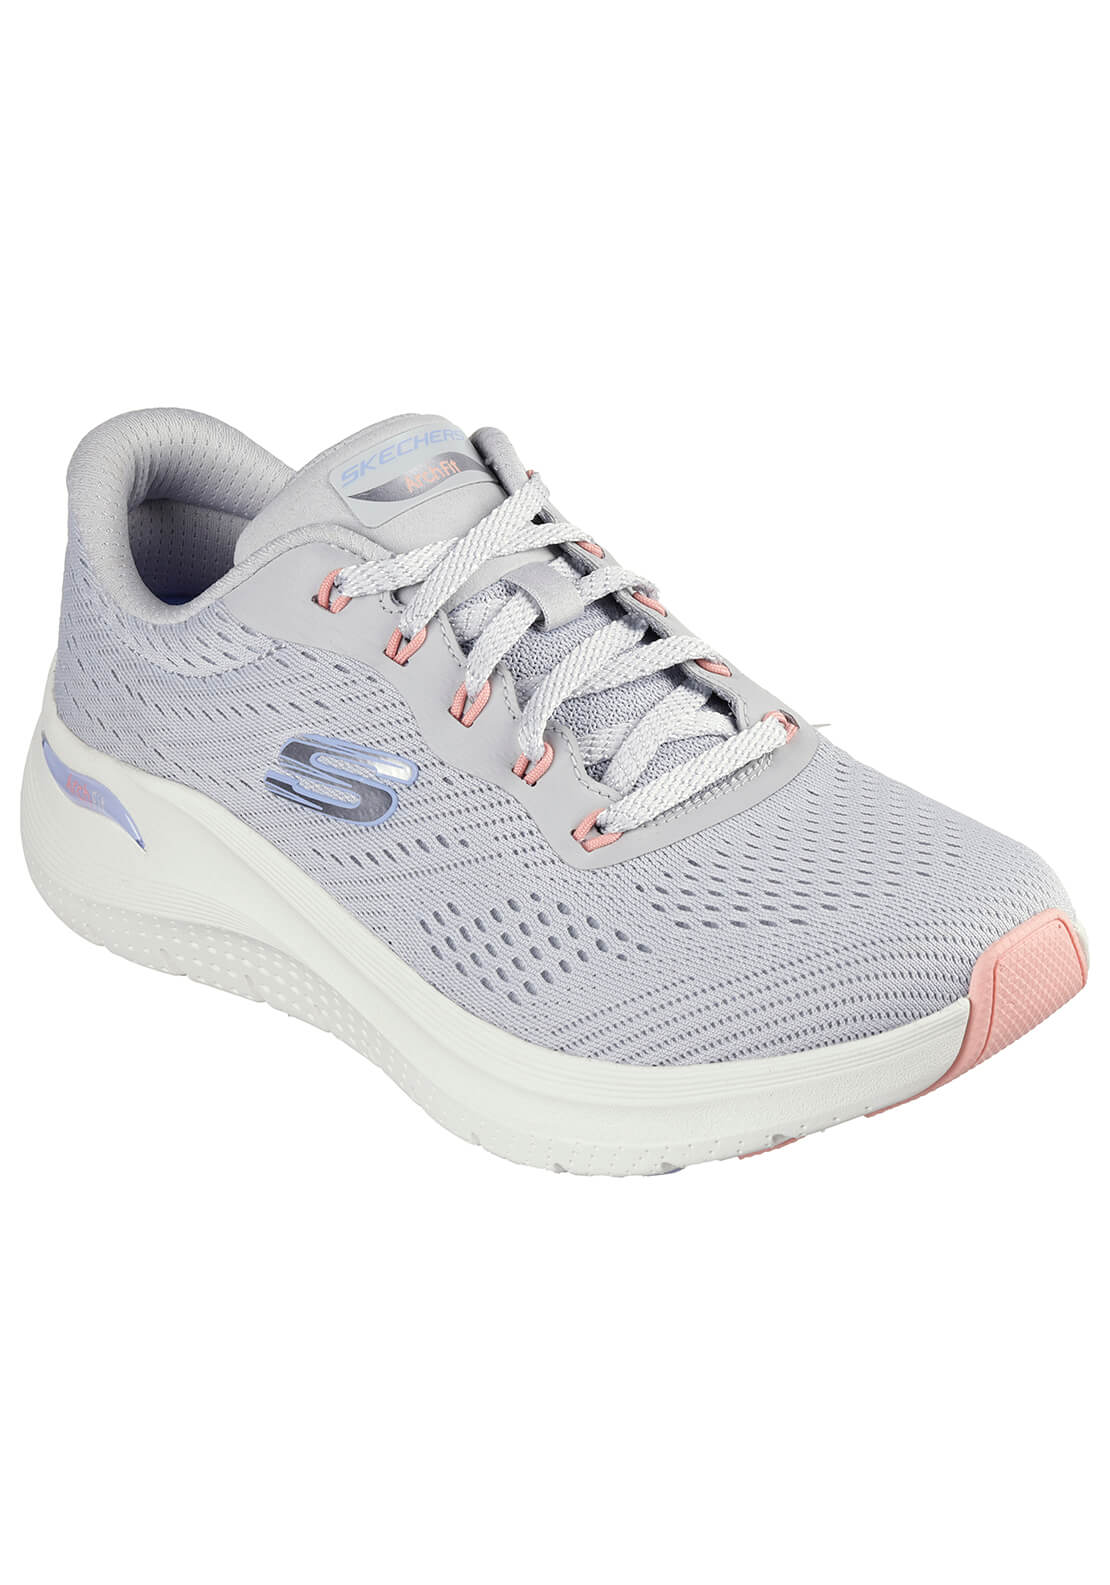 Skechers Arch Fit 2.0 Big League - Grey 1 Shaws Department Stores